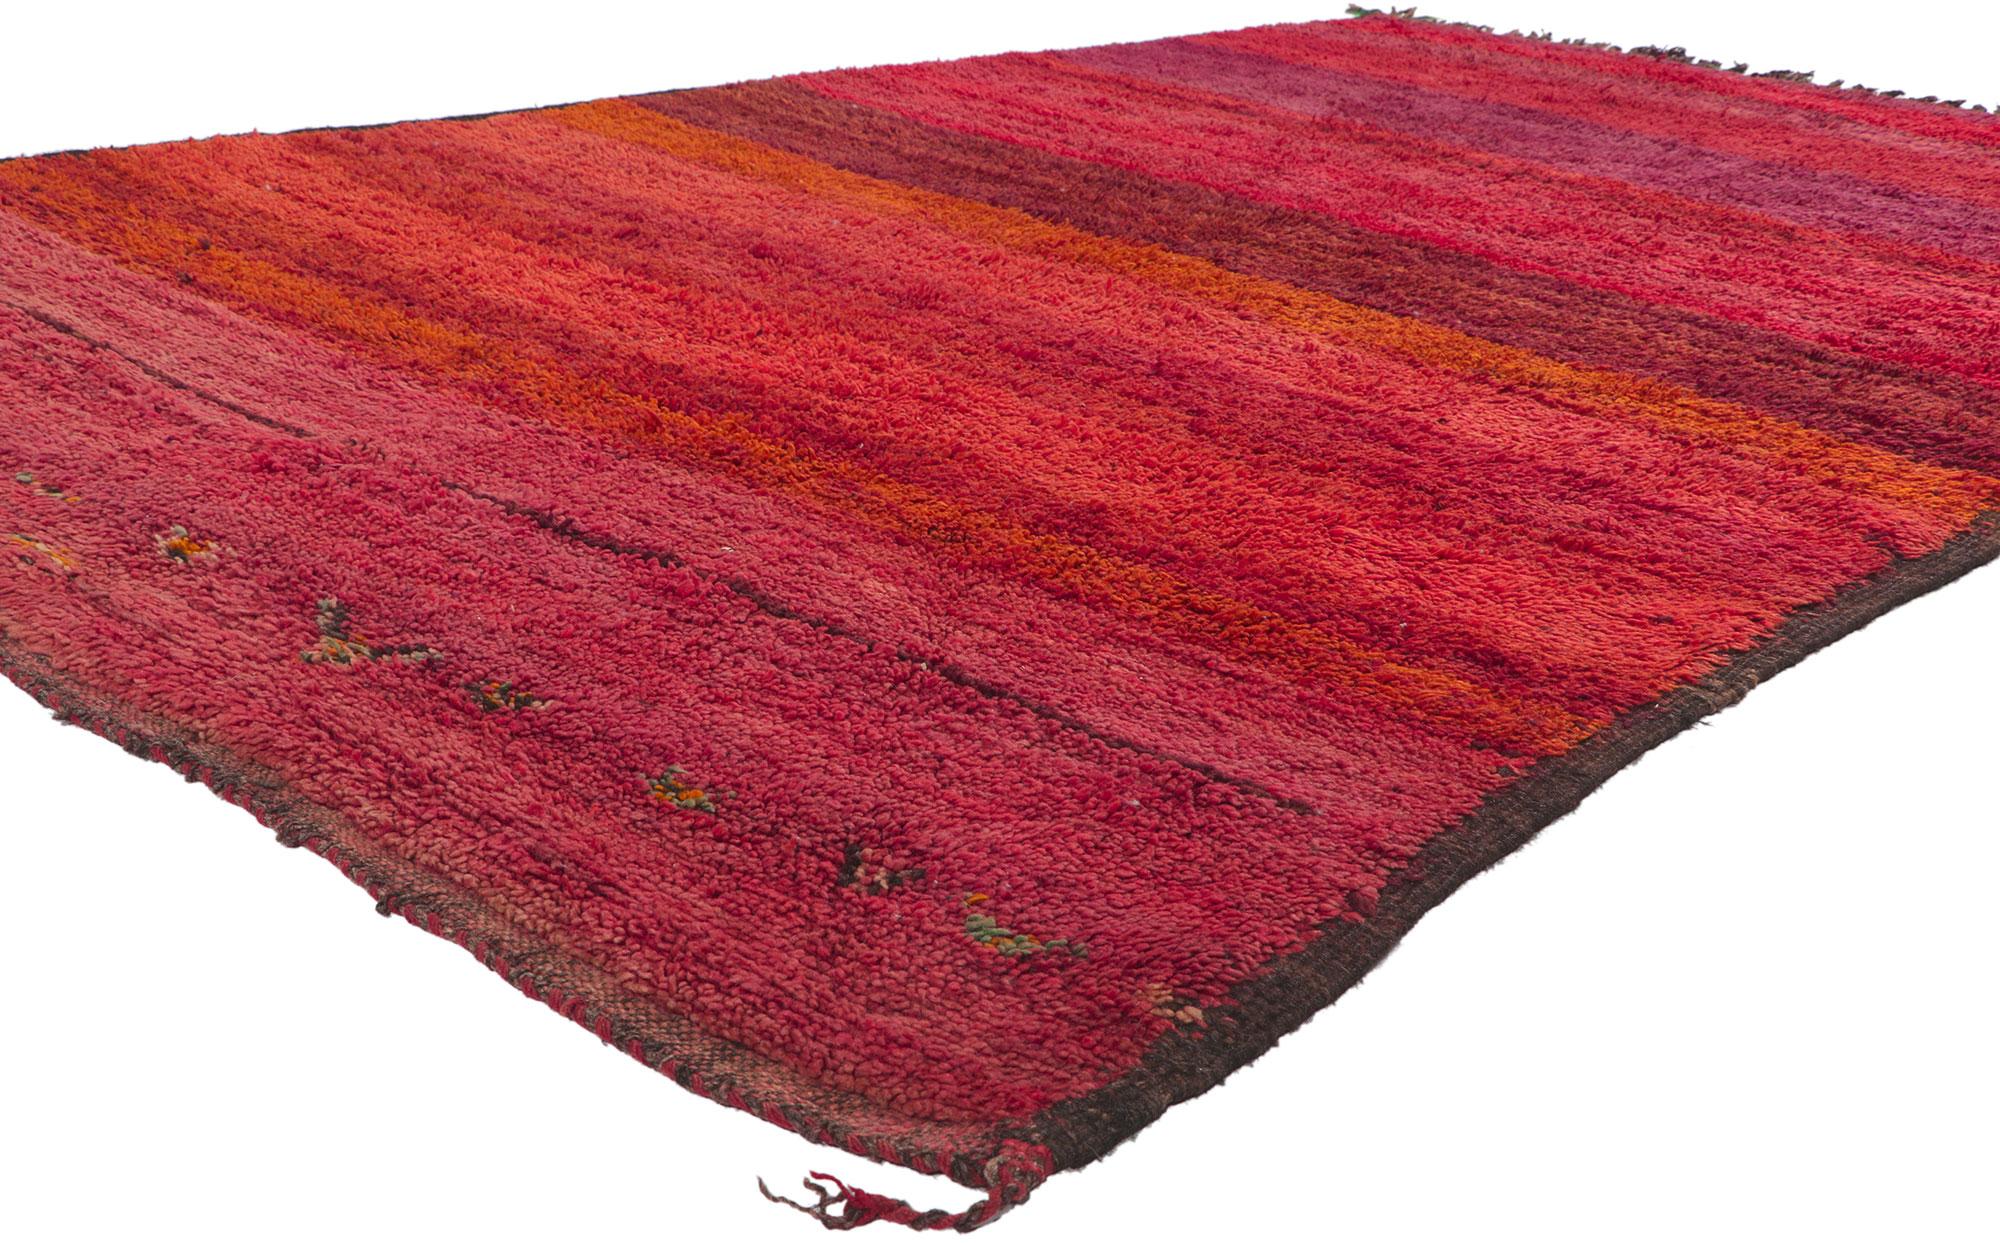 78363 Vintage Red Moroccan rug Beni Mrirt Carpet 06'07 x 10'07. Reflecting facets of Mark Rothko and color blocking, this vintage Moroccan rug is burrsting with chromatic brilliancy and emotional energy. The Viva Magenta striations and strong waves